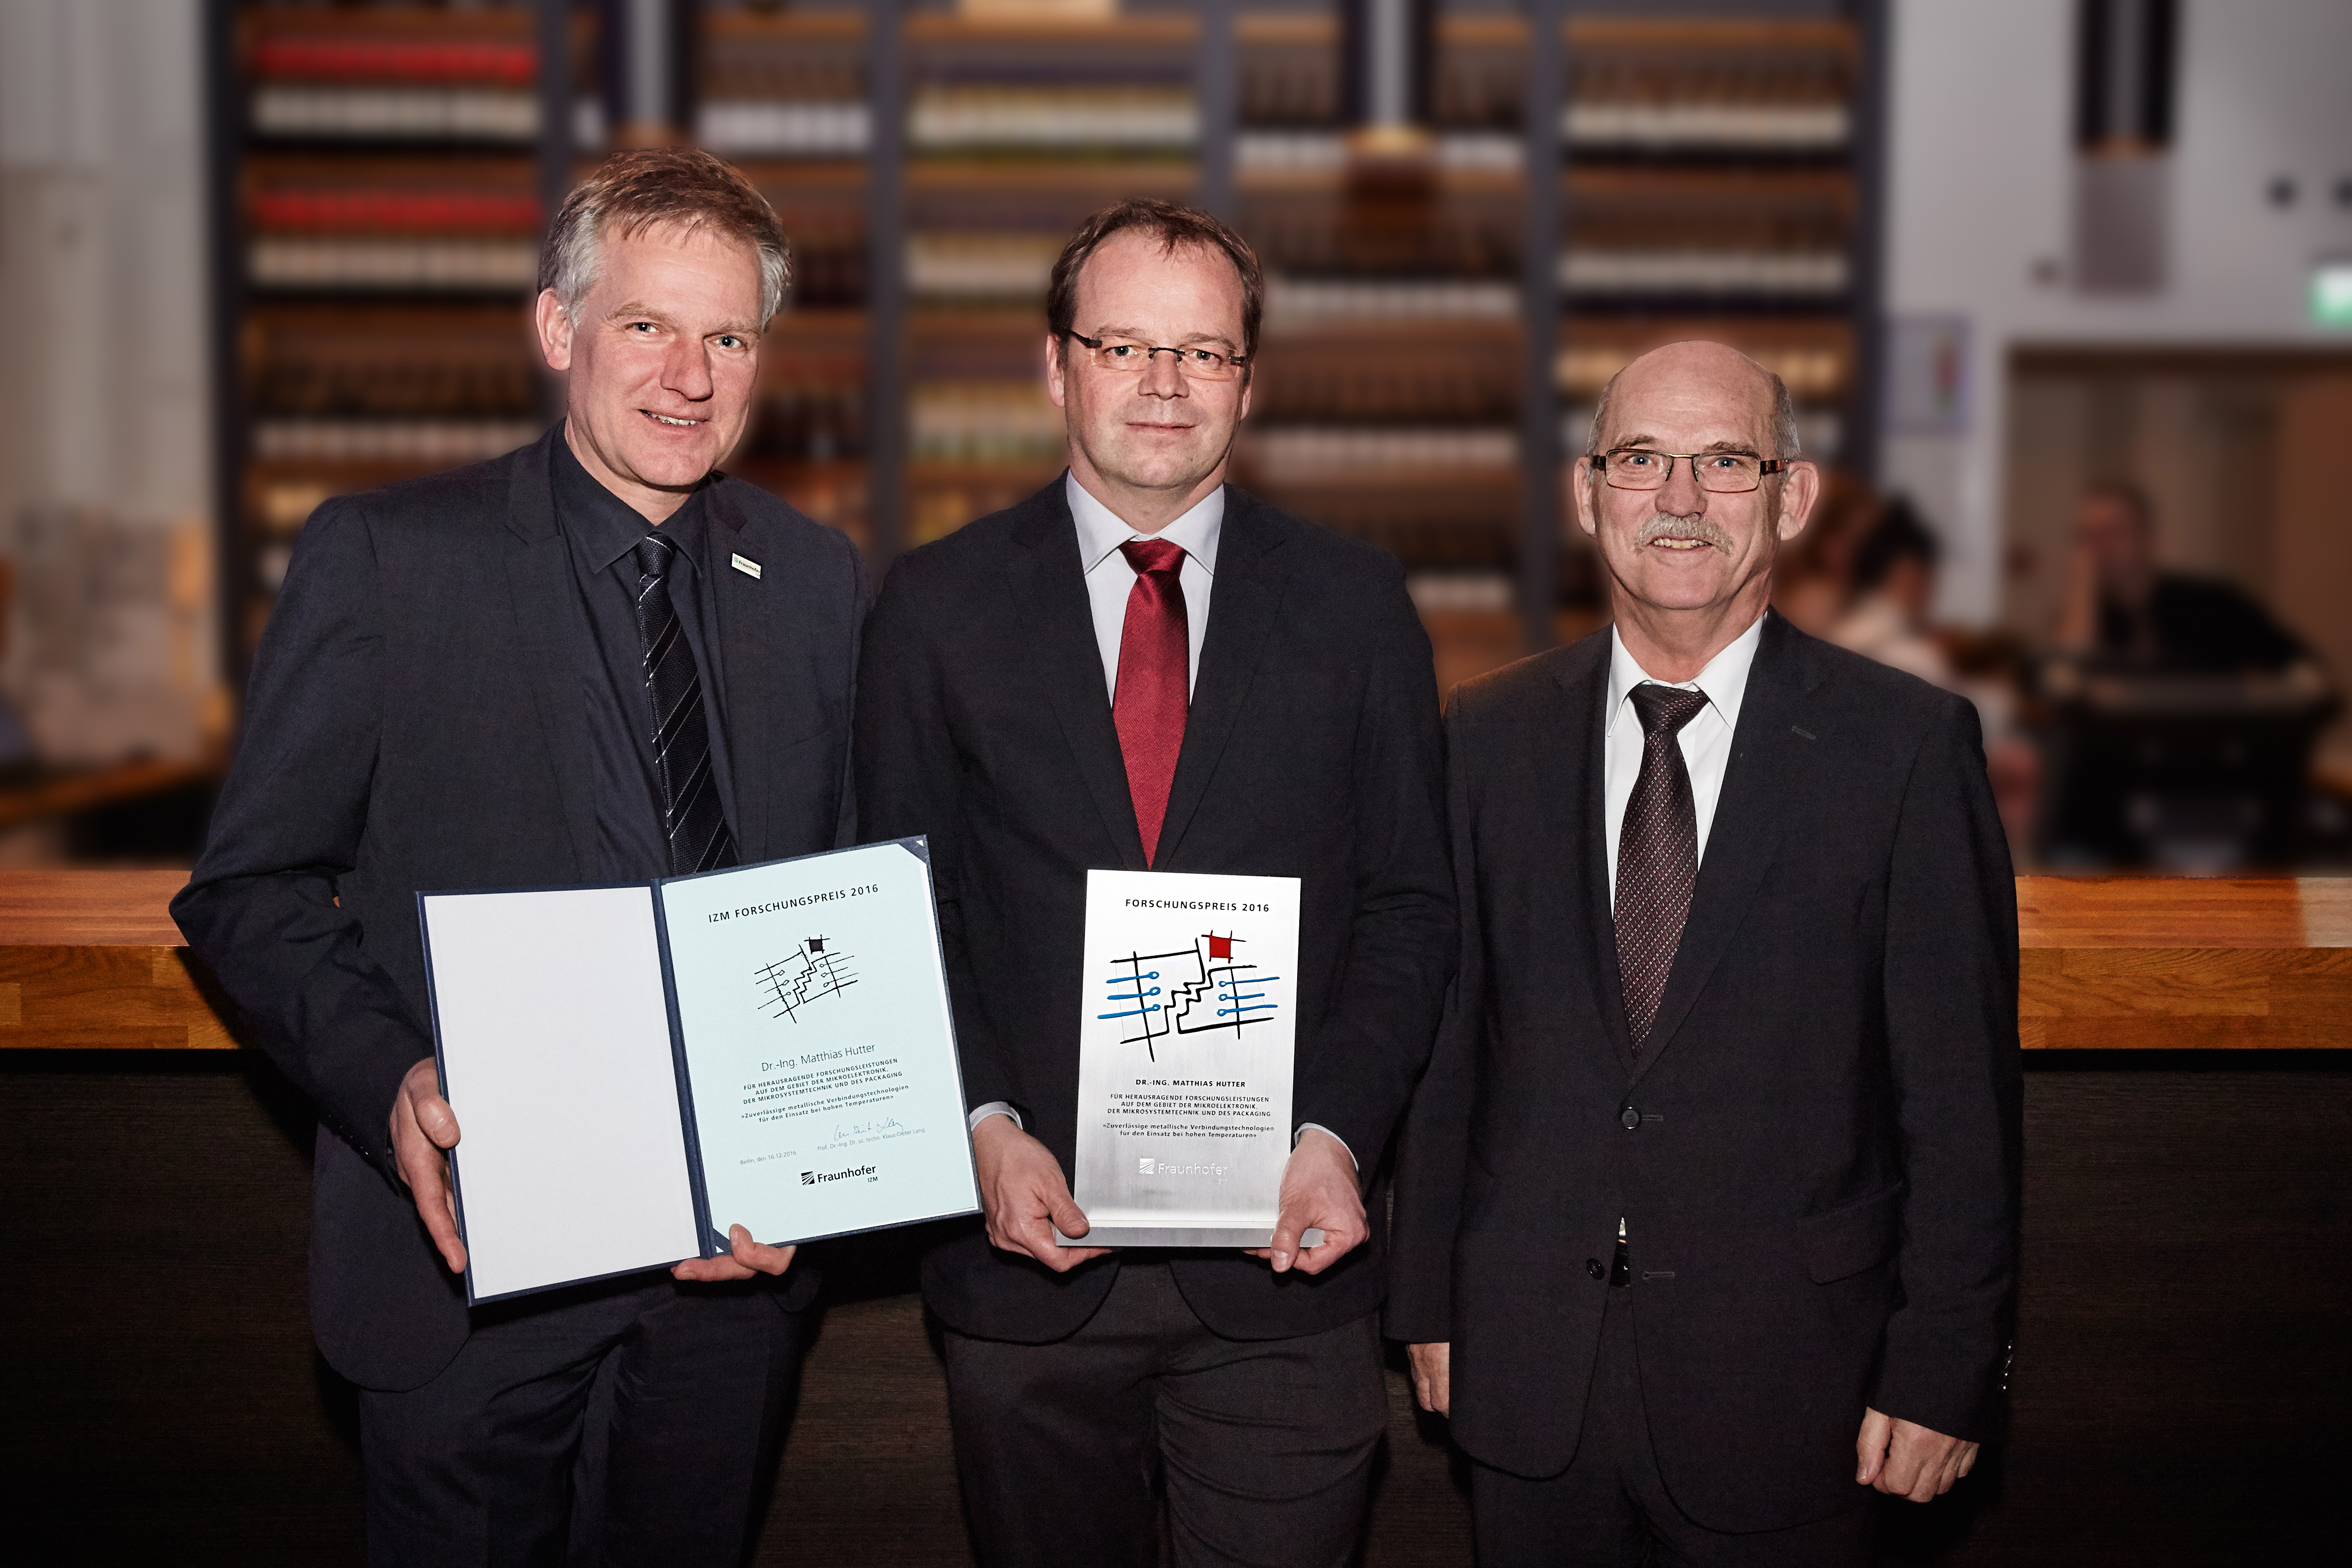 (from left to right) Prof. Martin Schneider-Ramelow IZM Research Award recipient Dr. Matthias Hutter and Head of the Institute Prof. Klaus-Dieter Lang